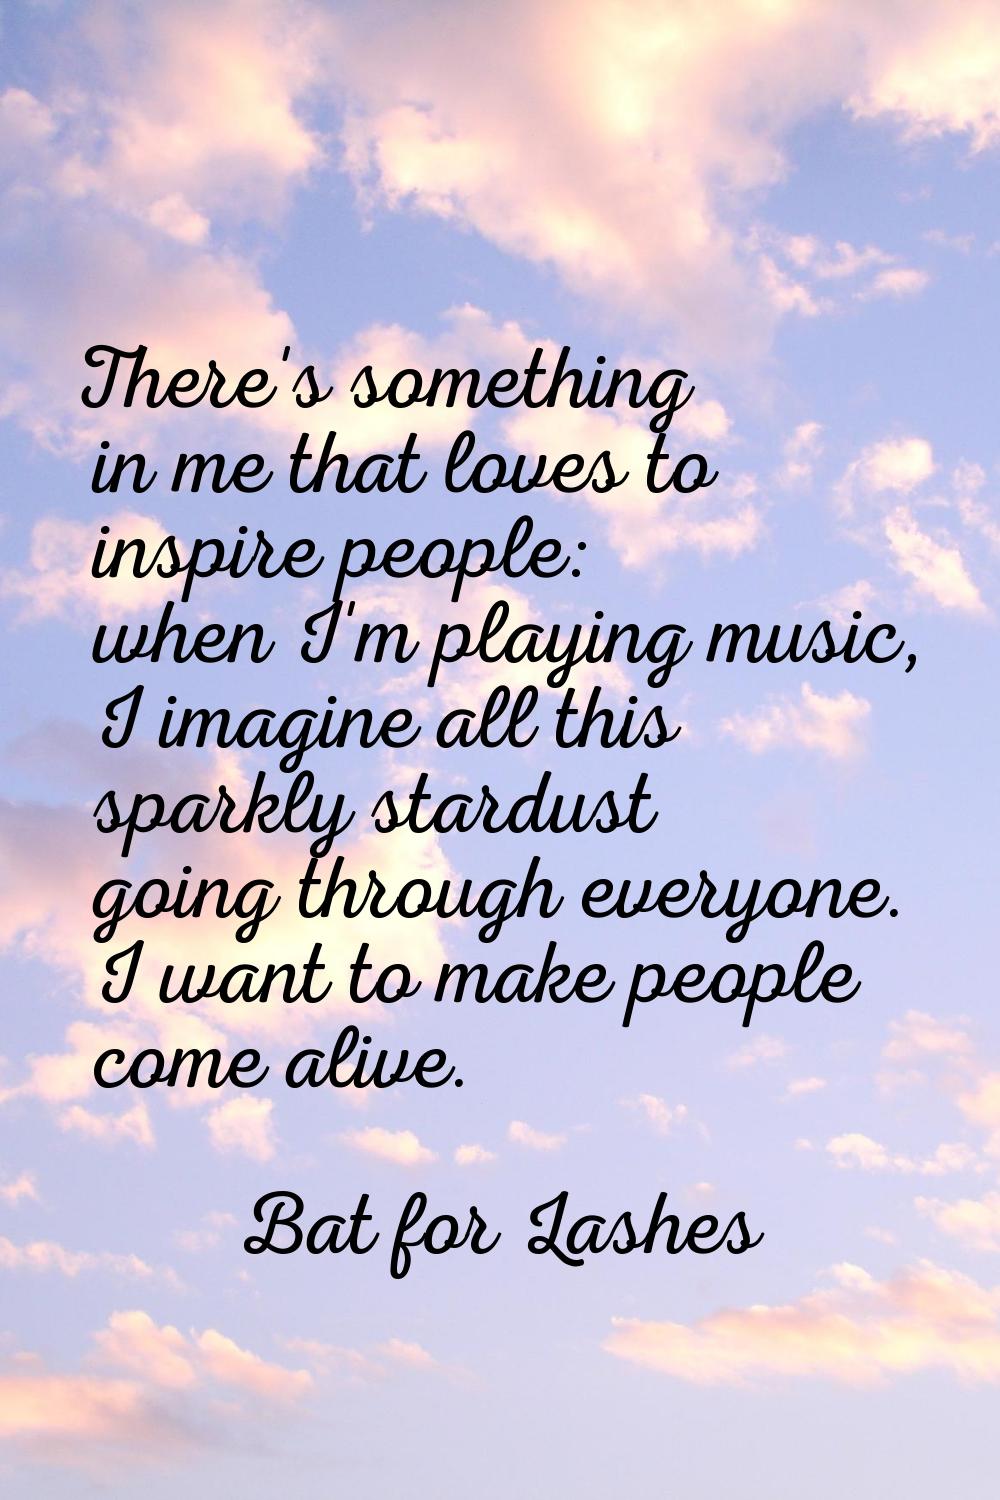 There's something in me that loves to inspire people: when I'm playing music, I imagine all this sp